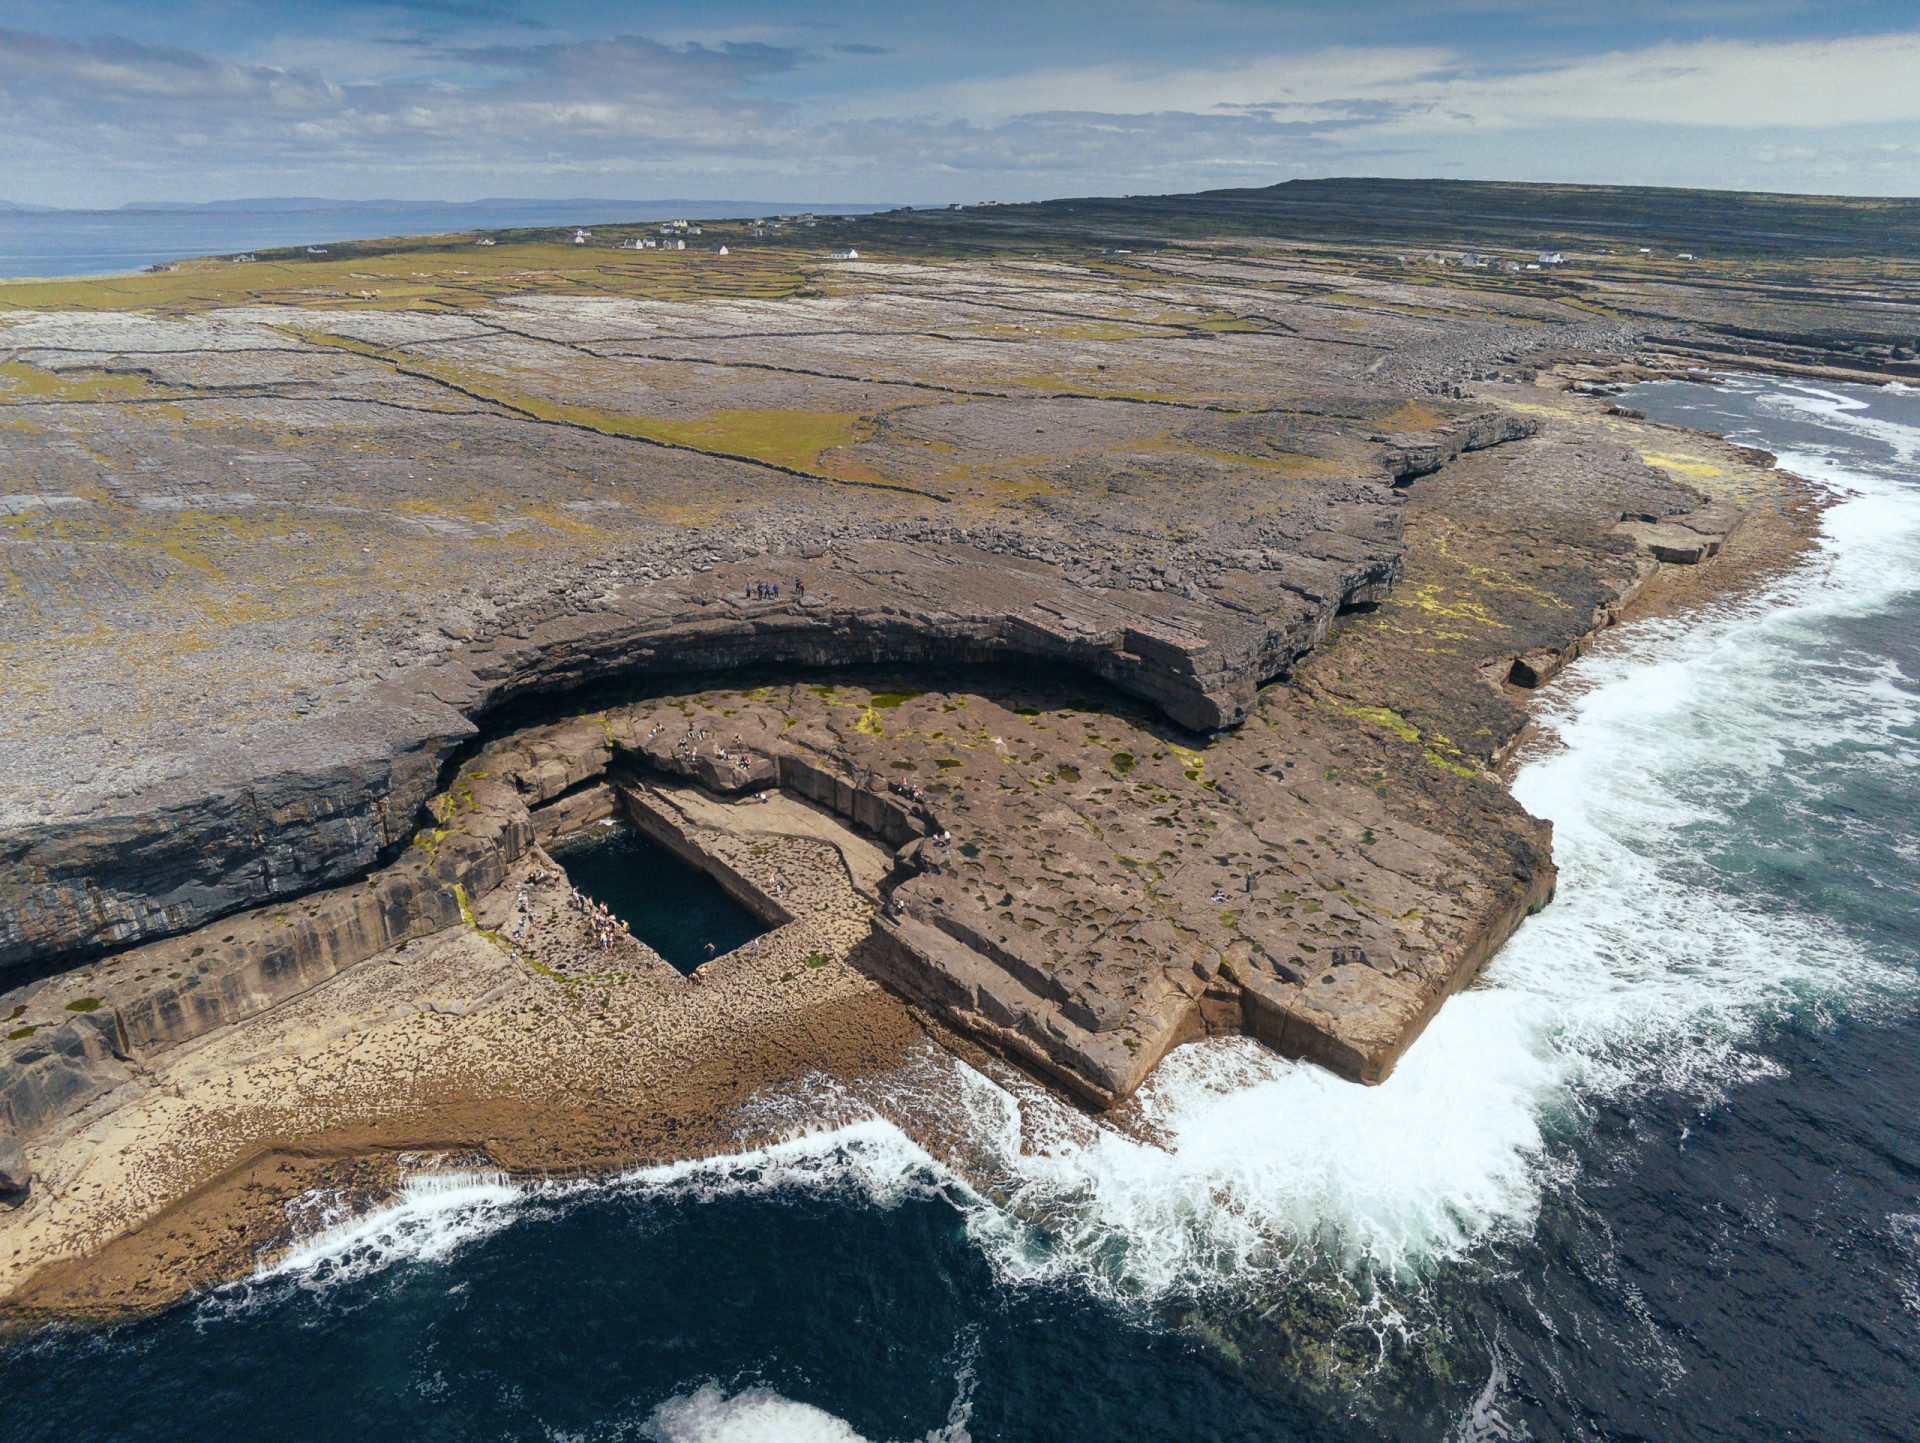 <p>A set of three islands off the coast of County Galway, the Aran Islands are known for their ancient sites such as the fort of Dún Aonghasa (pictured) on Inishmore.</p><p><a href="https://www.msn.com/en-au/community/channel/vid-7xx8mnucu55yw63we9va2gwr7uihbxwc68fxqp25x6tg4ftibpra?cvid=94631541bc0f4f89bfd59158d696ad7e">Follow us and access great exclusive content every day</a></p>